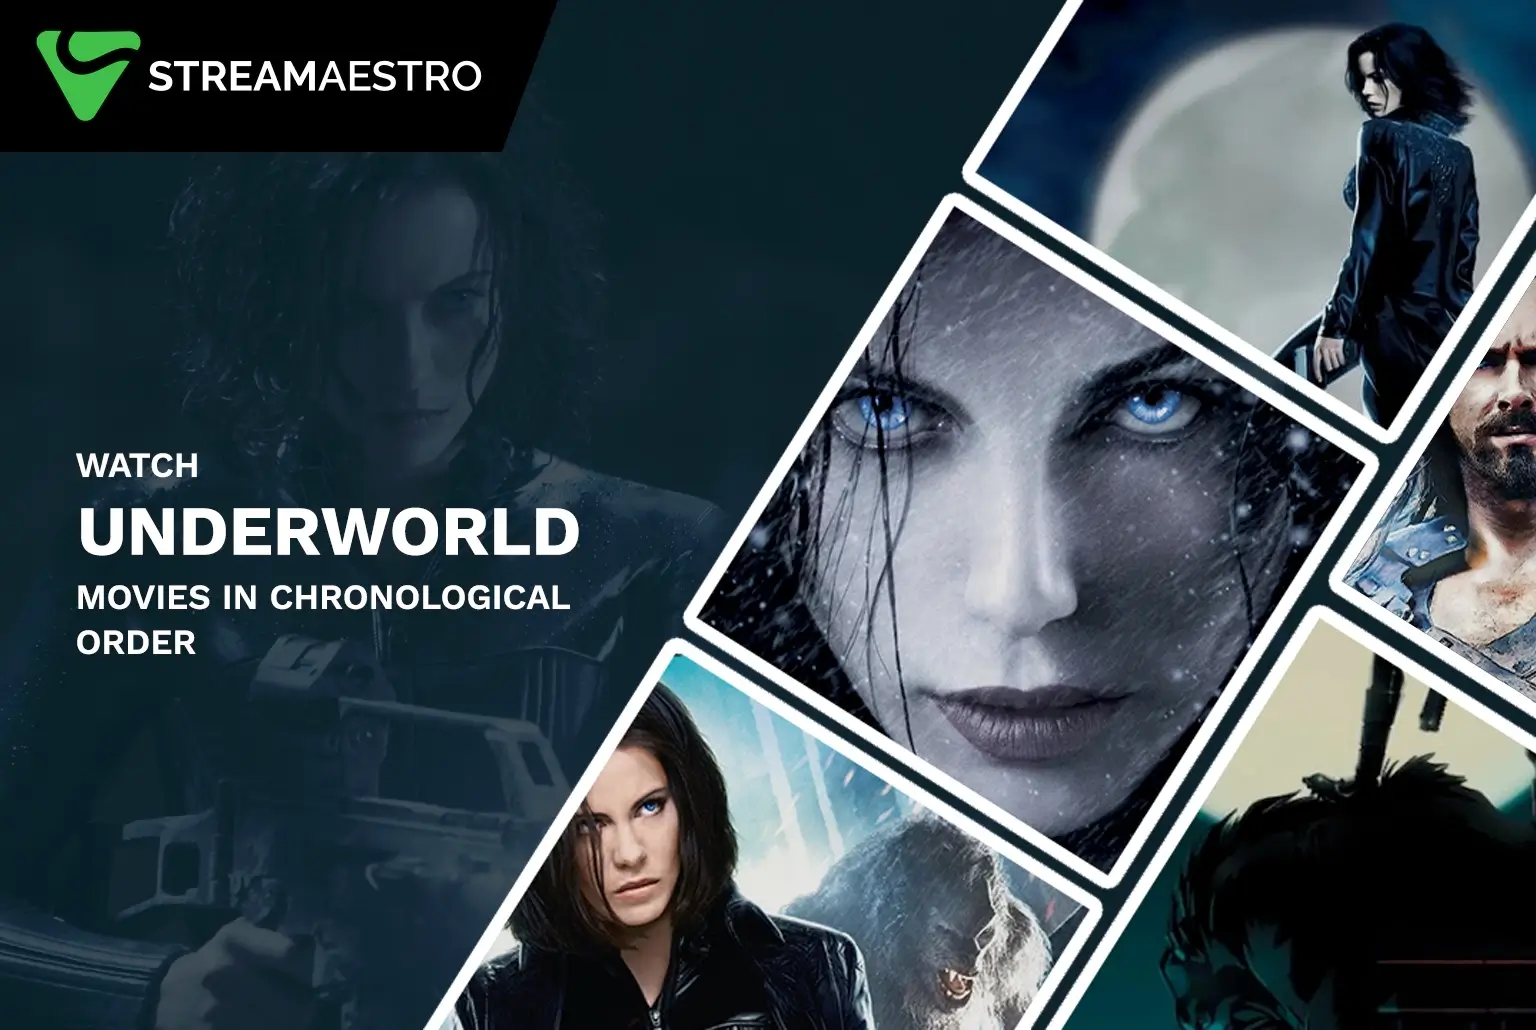 Watch Underworld Movies in Chronological Order